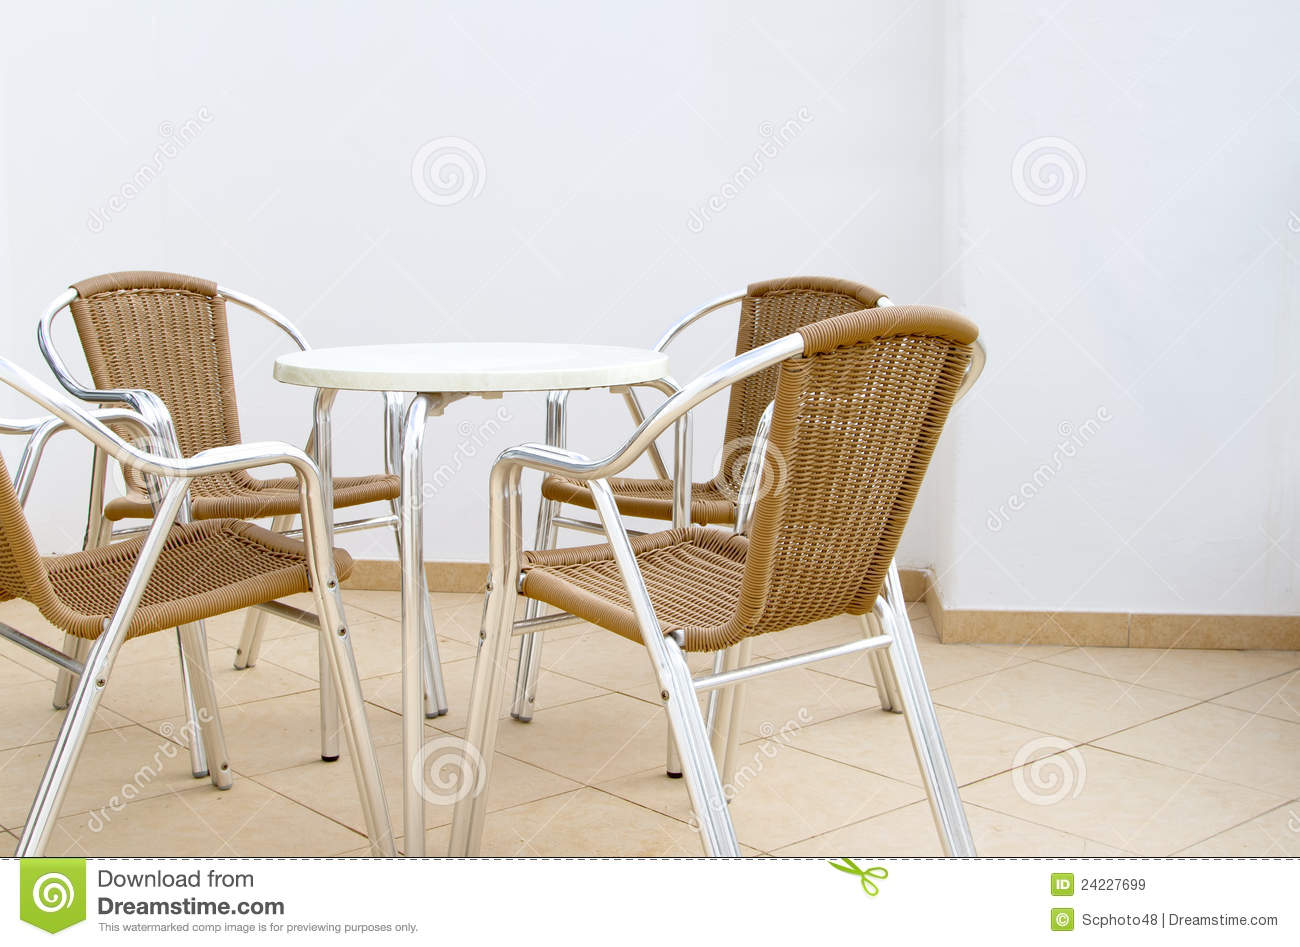 Patio Furniture Royalty Free Stock Images   Image  24227699